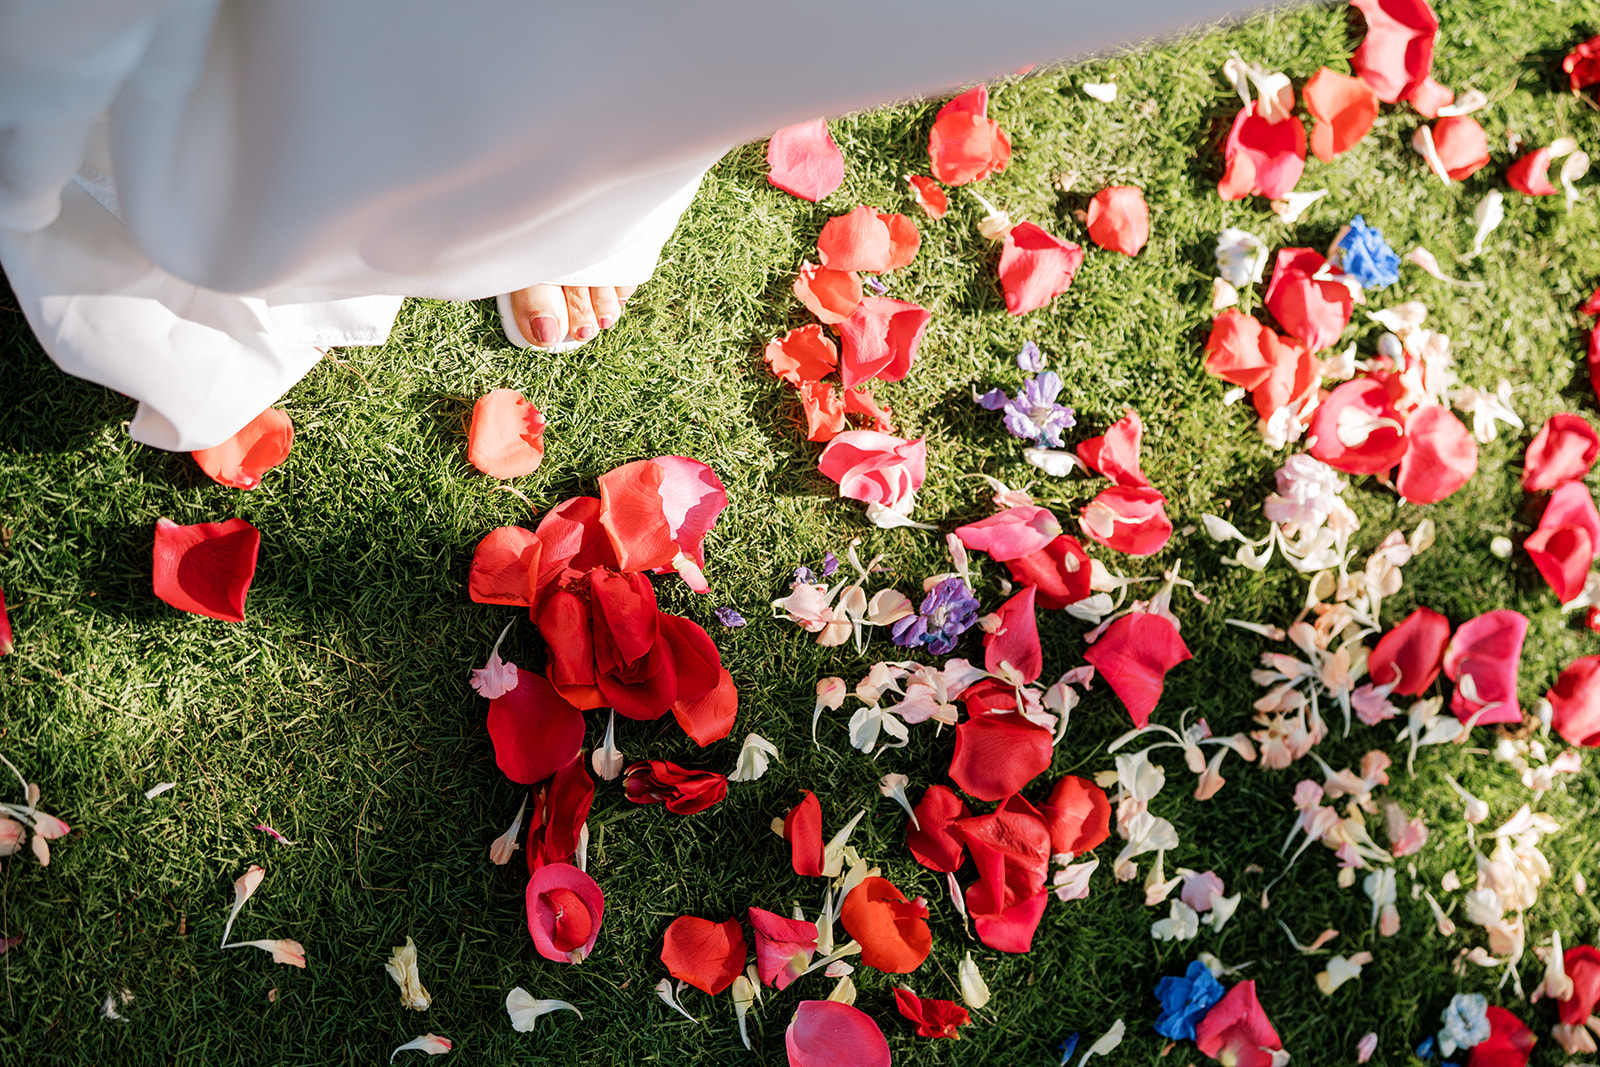 Bride walking over a lawn scattered with colorful flower petals.